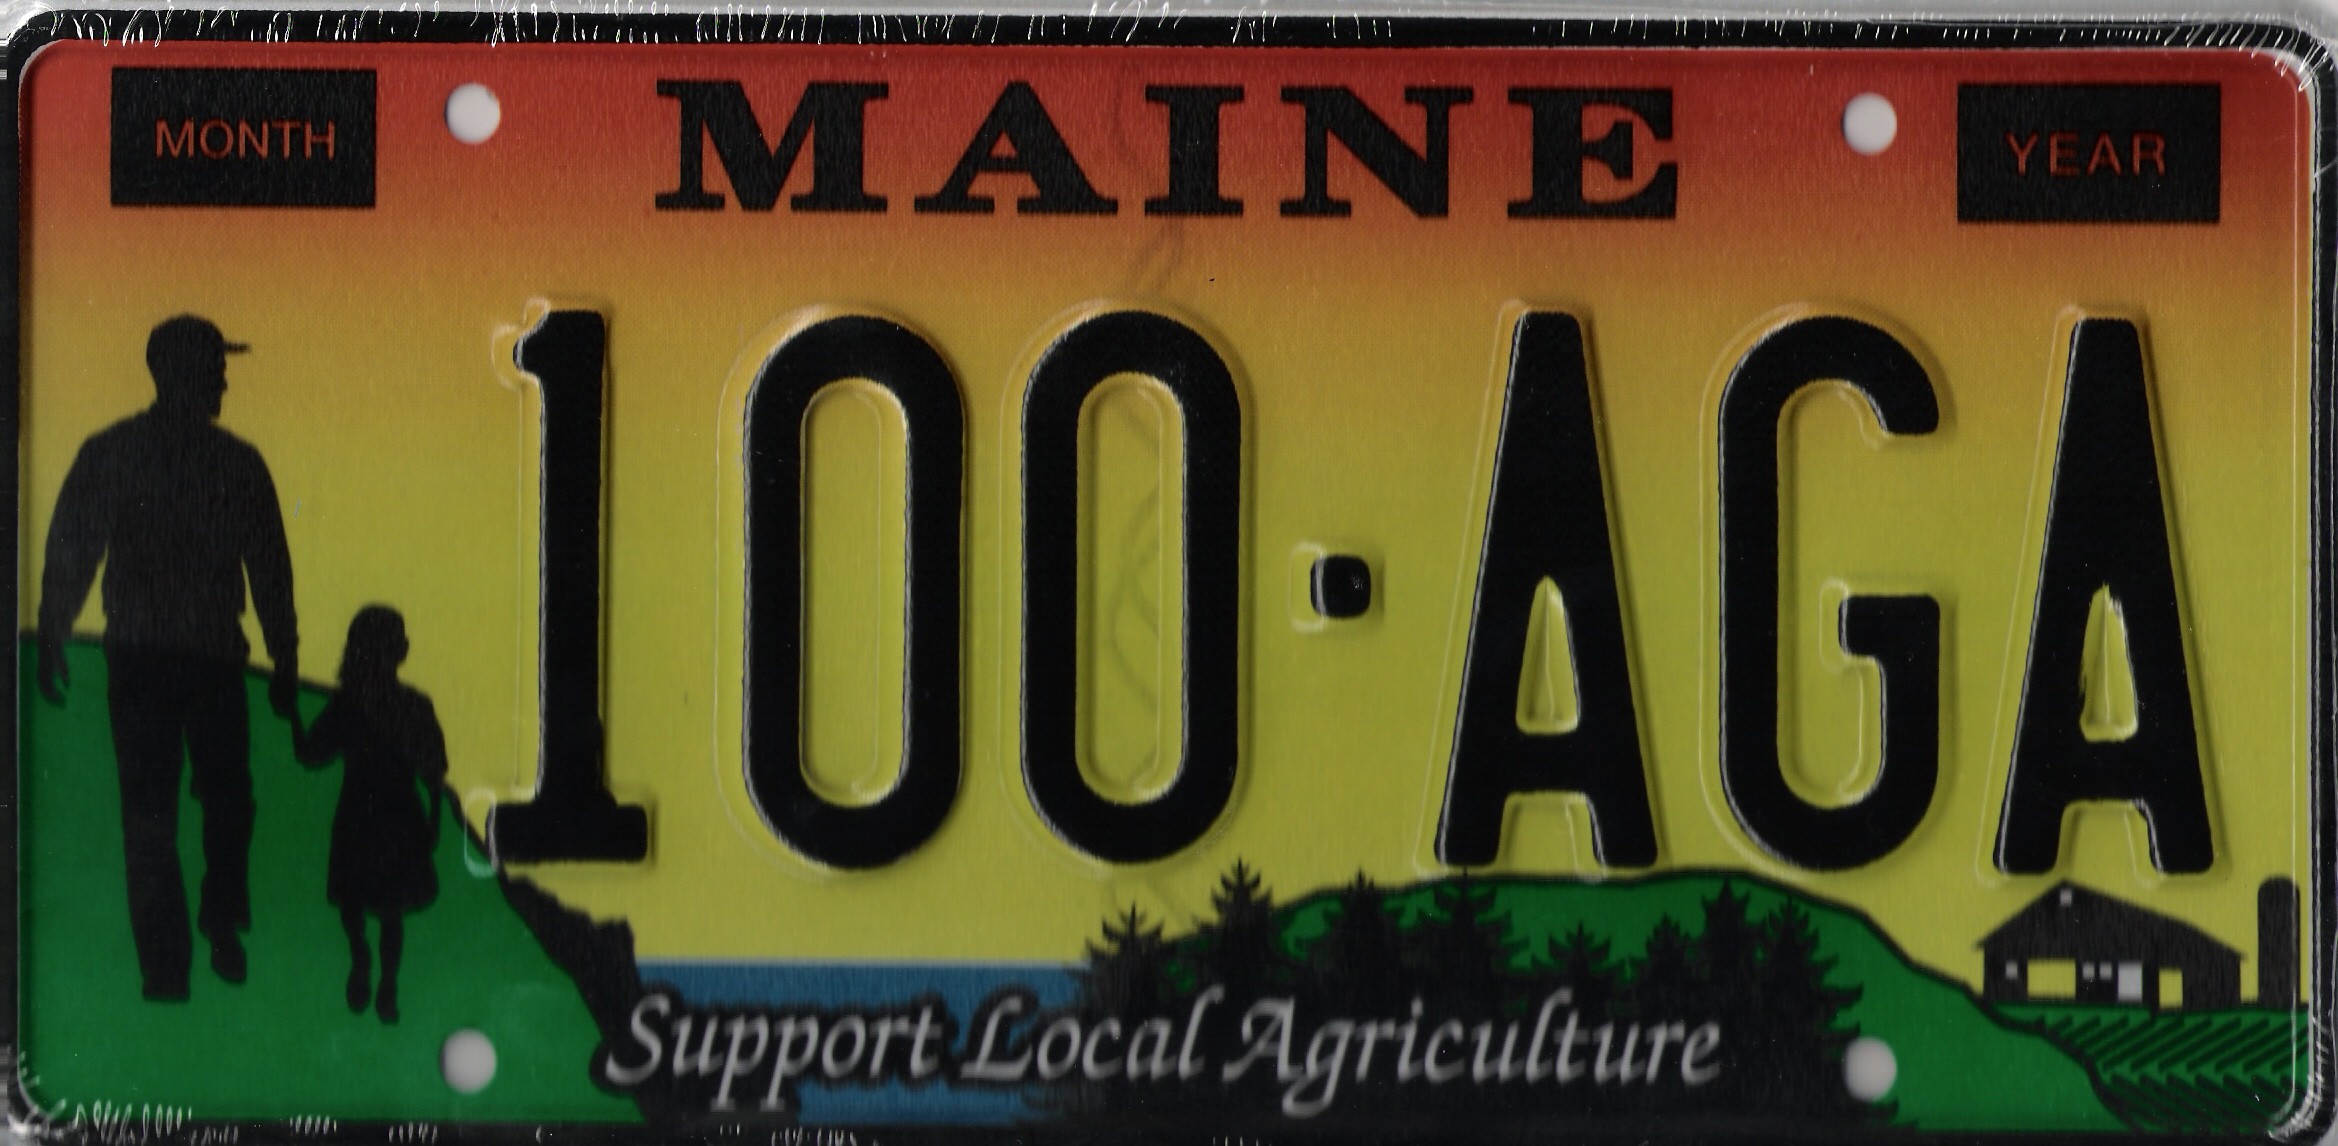 Image of the Agriculture plate